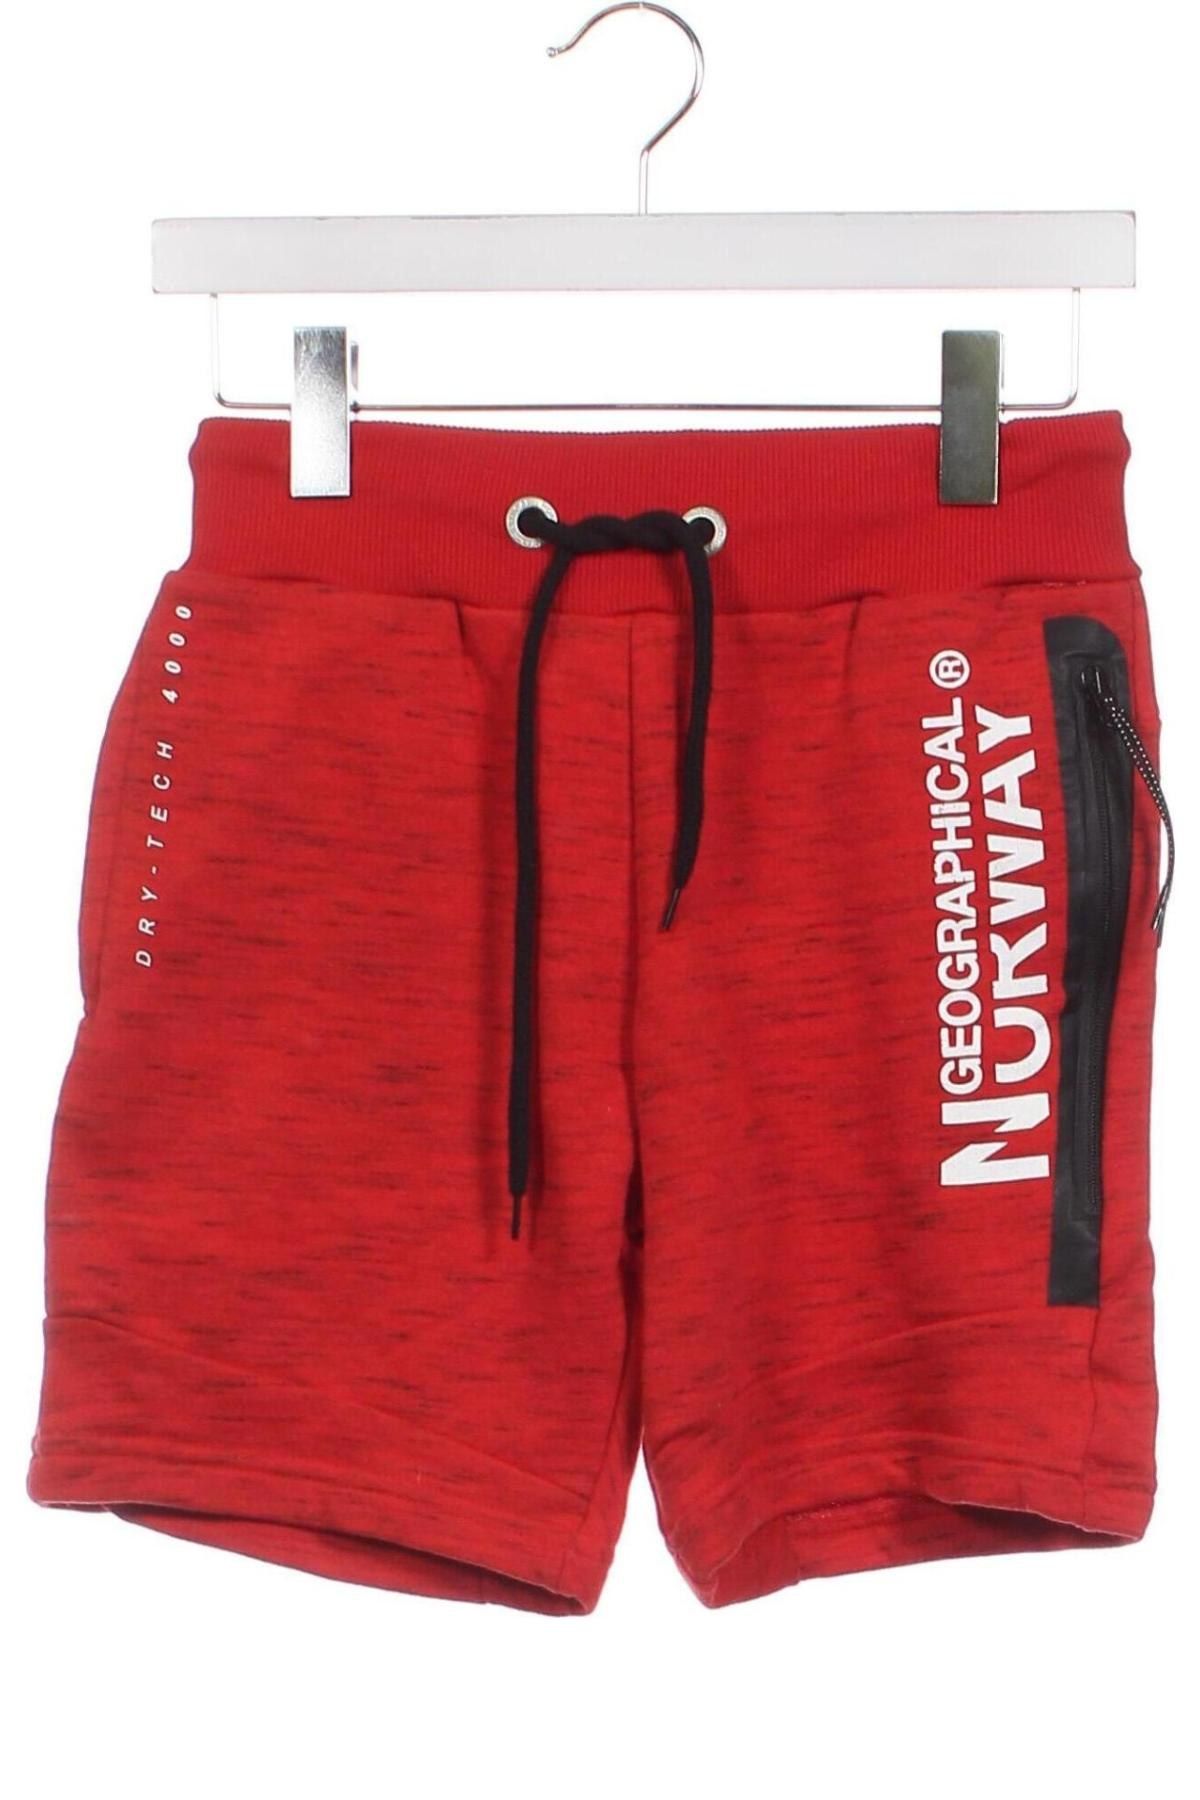 Kinder Shorts Geographical Norway, Größe 7-8y/ 128-134 cm, Farbe Rot, Preis € 30,41